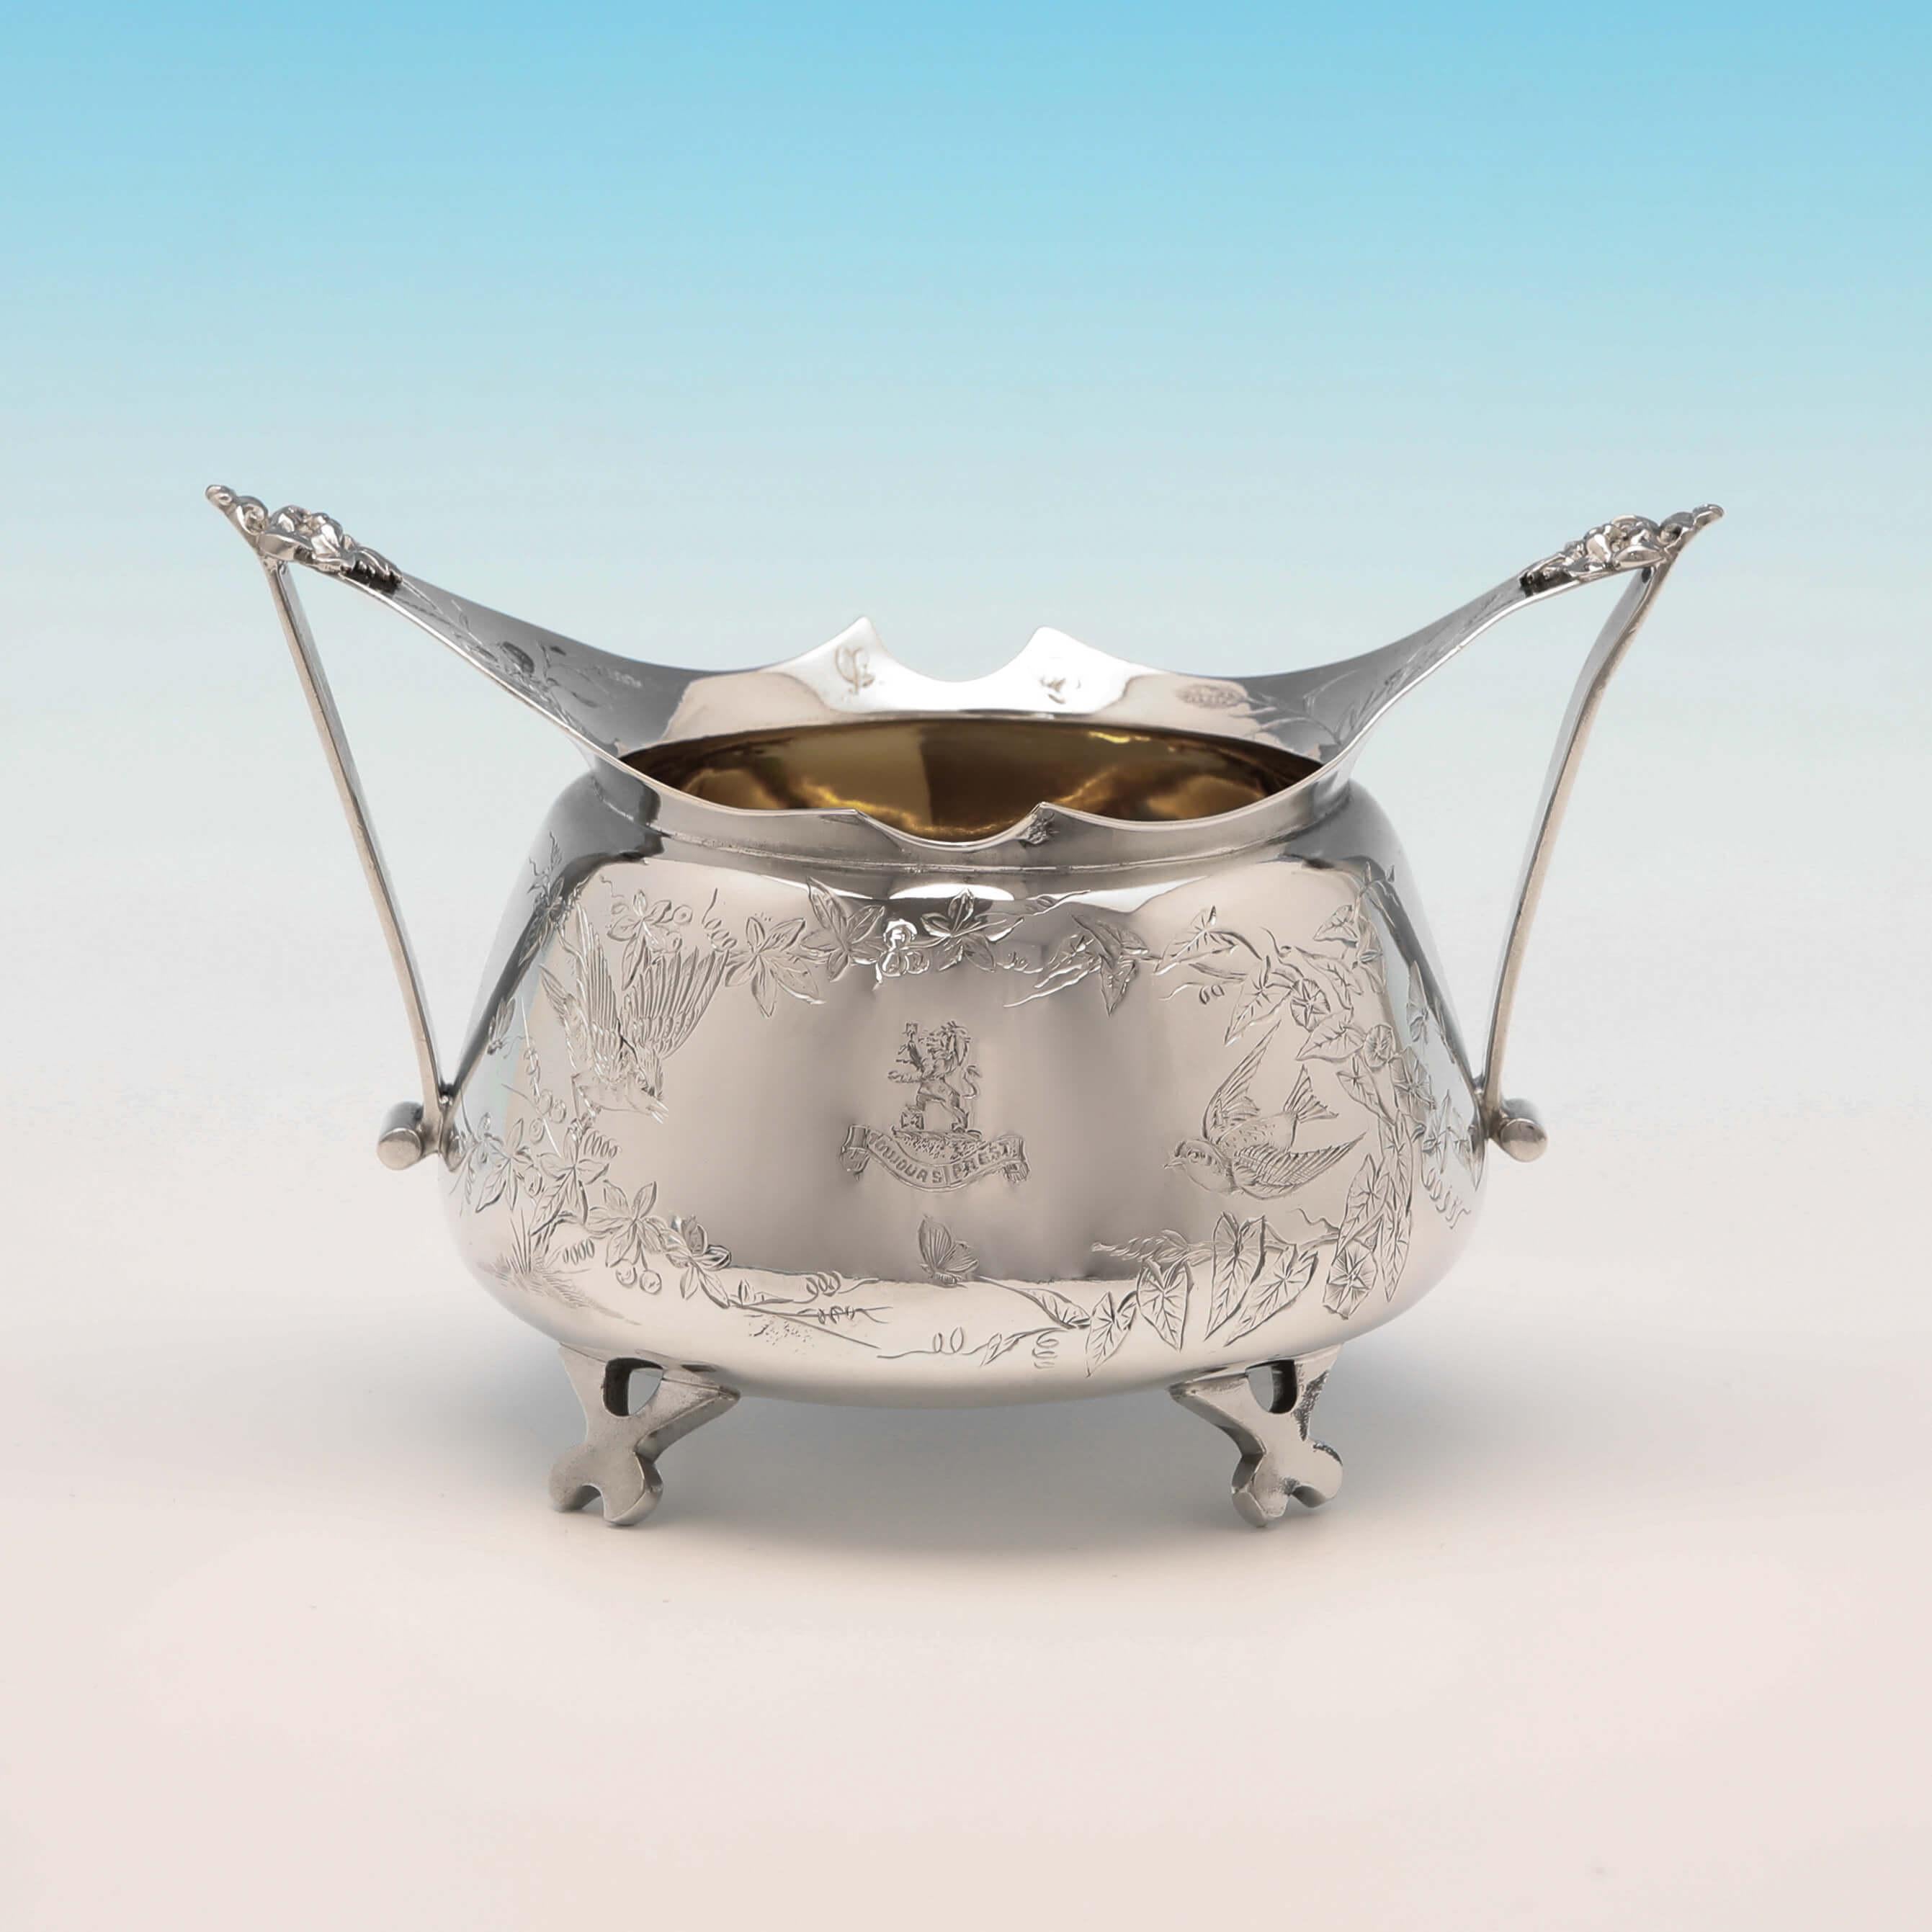 Hallmarked in London in 1881 by Stephen Smith, this striking, Victorian, antique sterling silver sugar and cream set, is in the Aesthetic Movement style, featuring wonderfully engraved decoration, an engraved crest and motto to each, gilt interiors